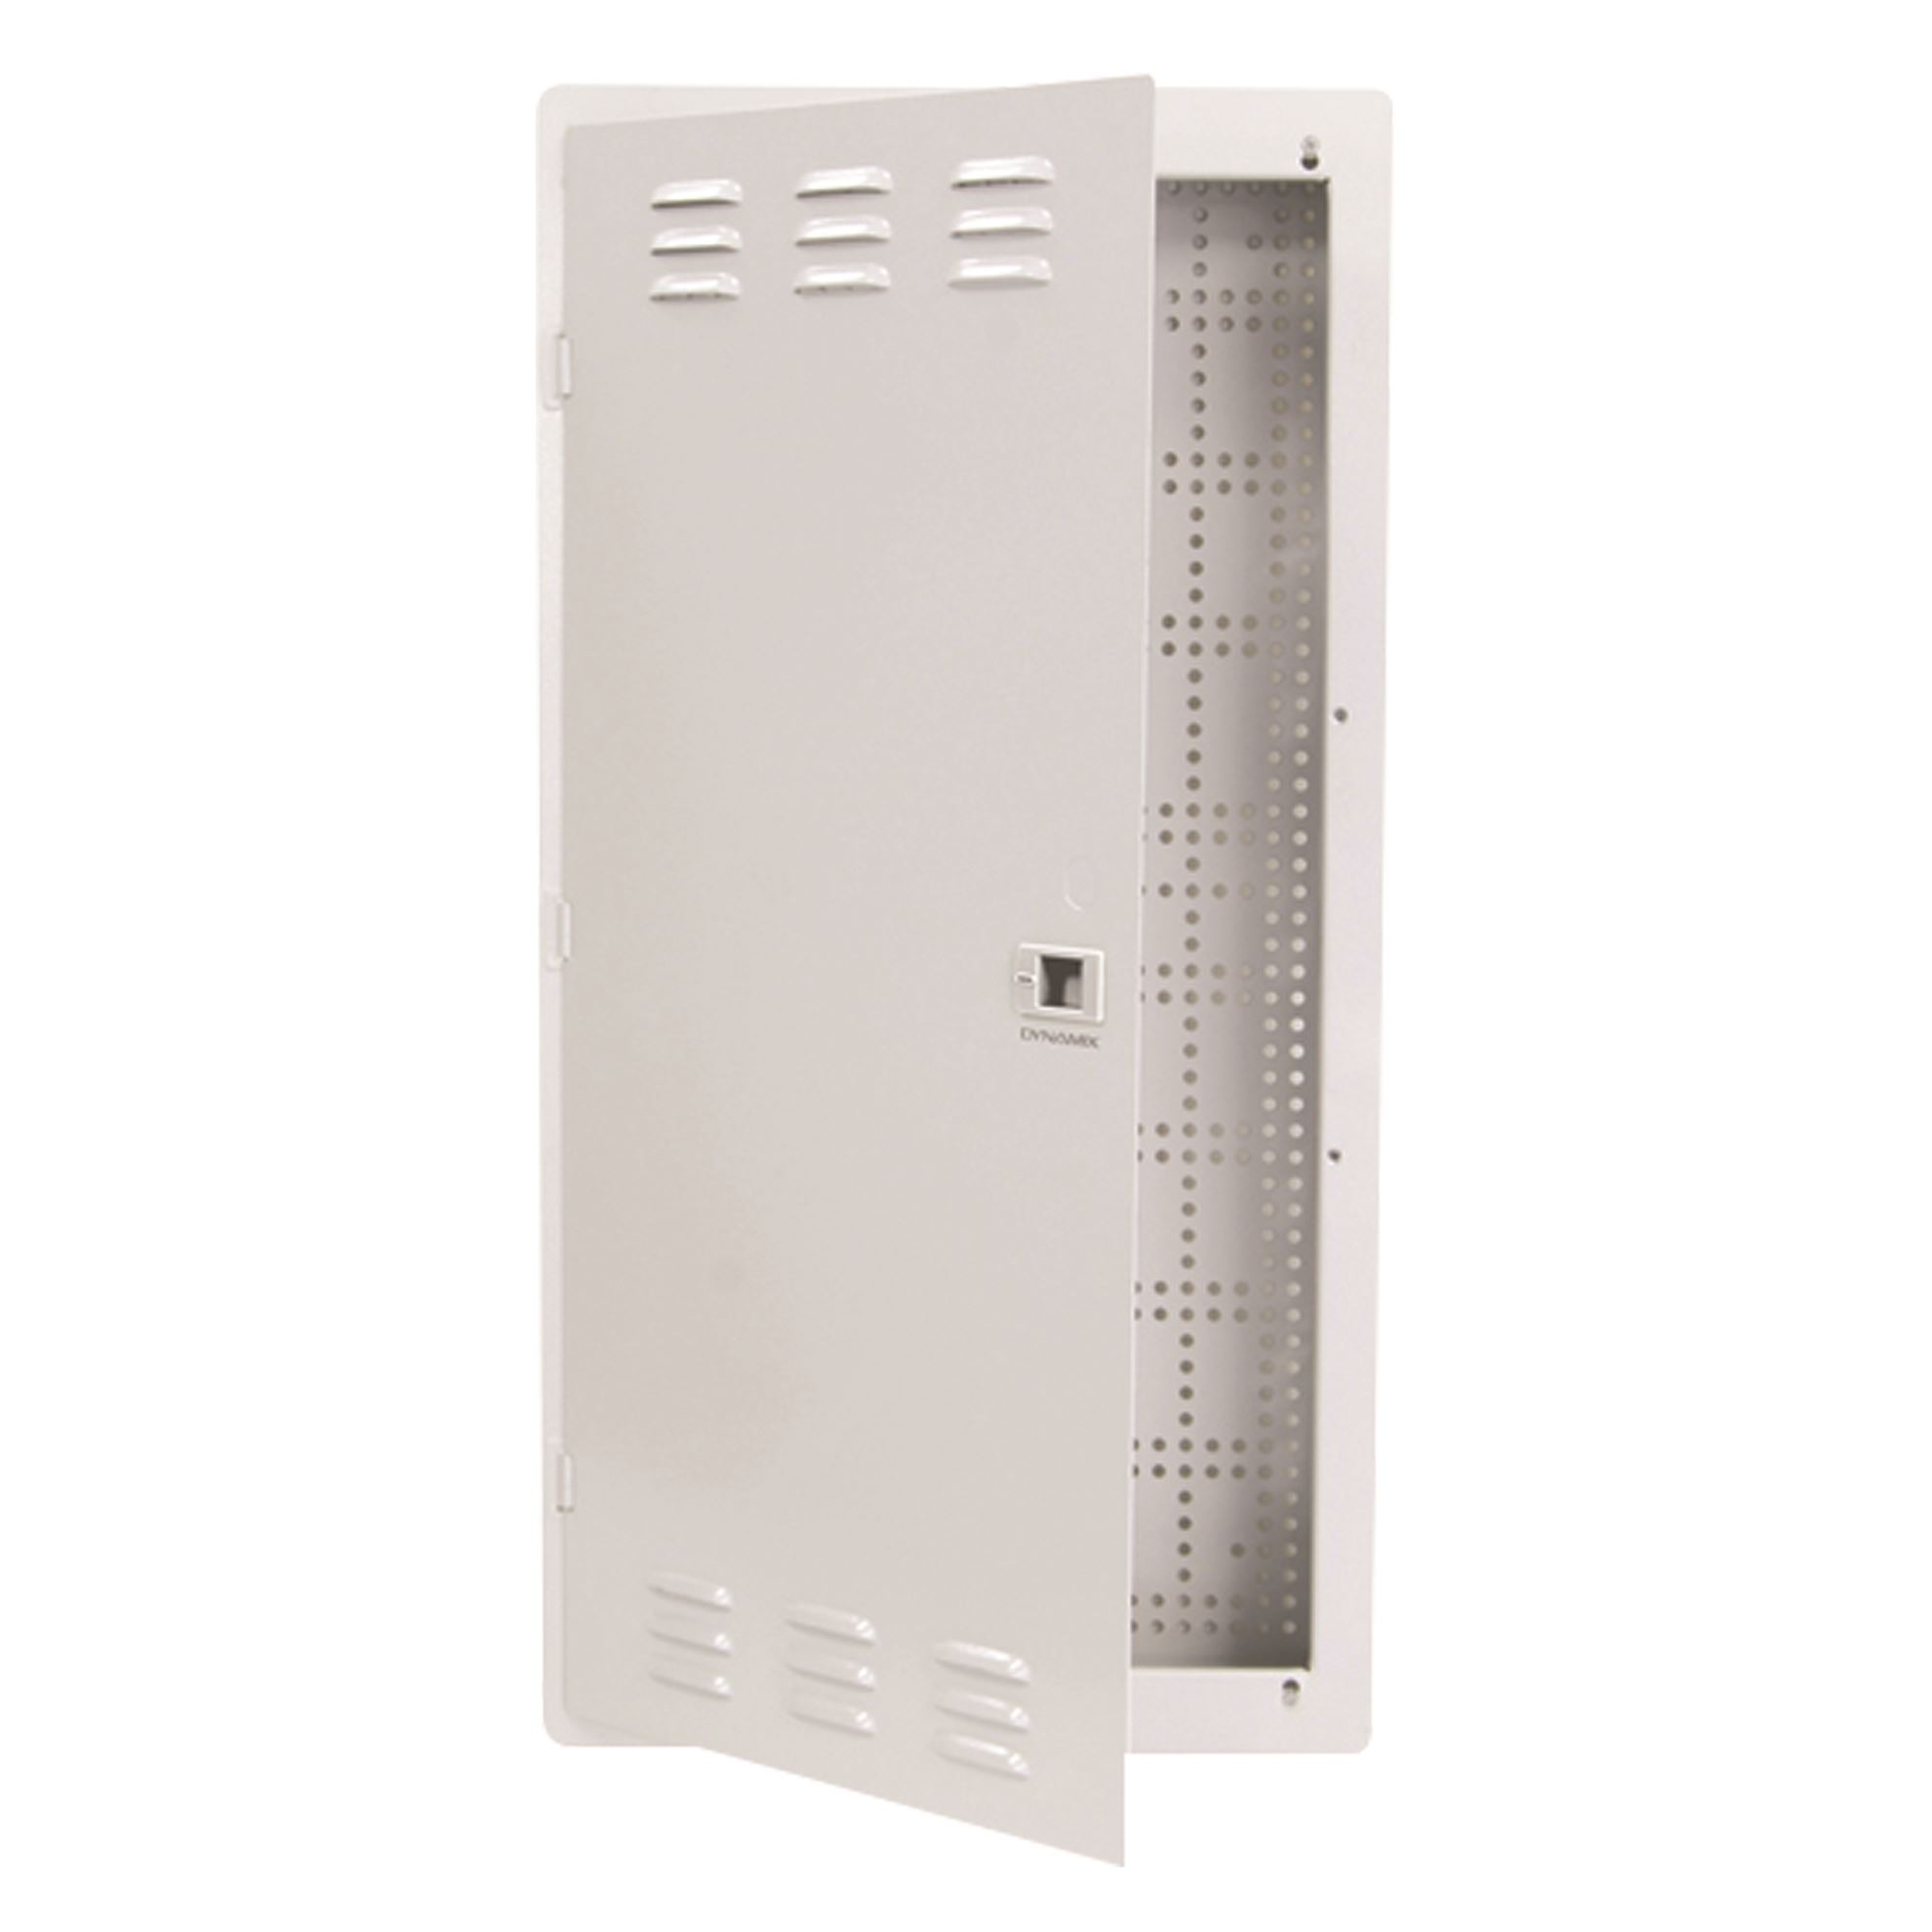 28'' FTTH Low Profile Network Enclosure Recessed Wall Mount with Vented Lid Cable & Dual GPO Knock outs.